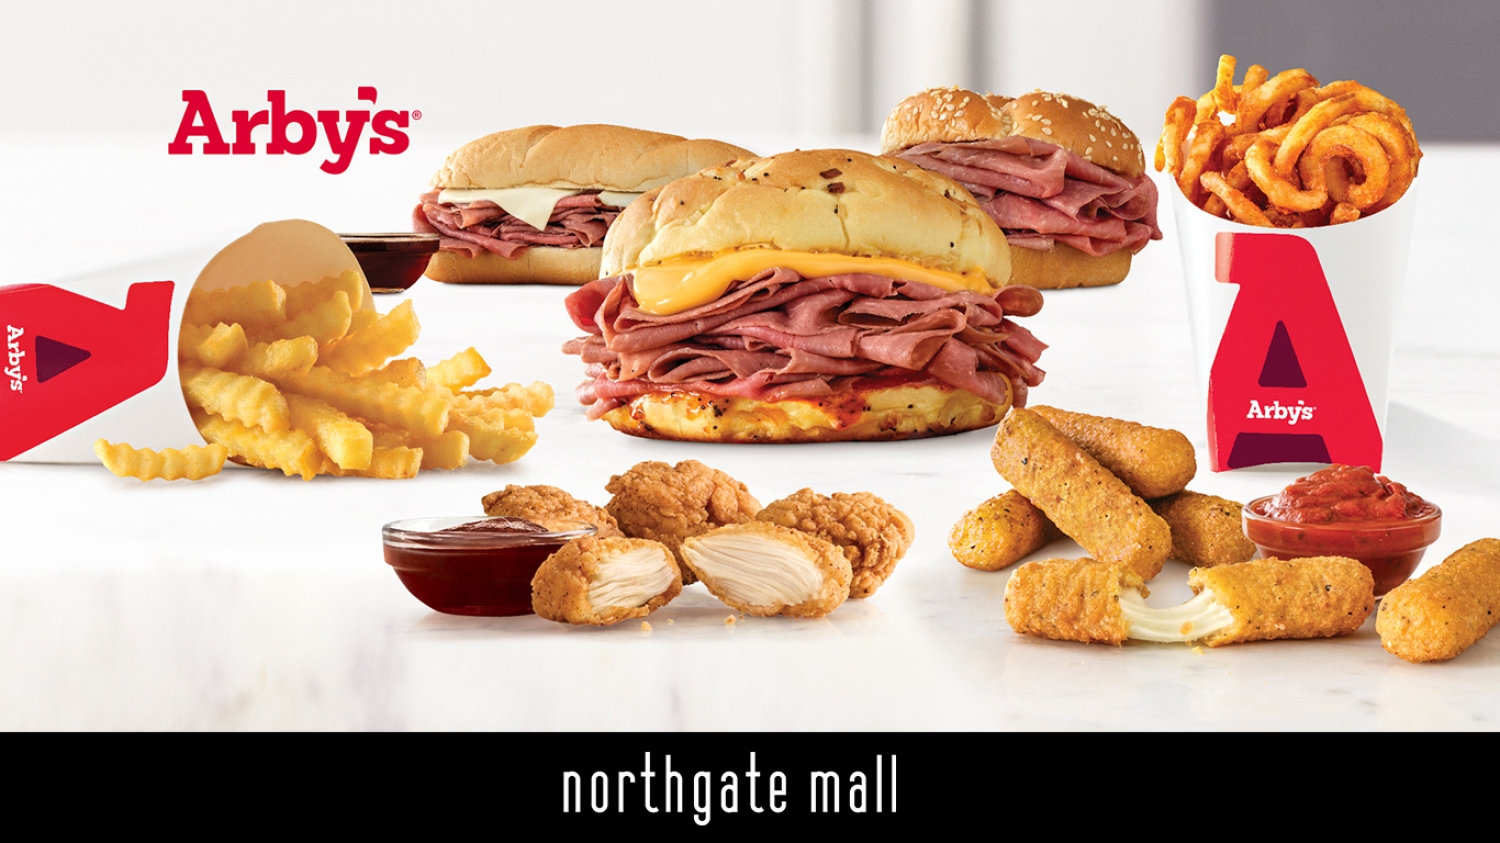 Arby's, We Have The Meats!